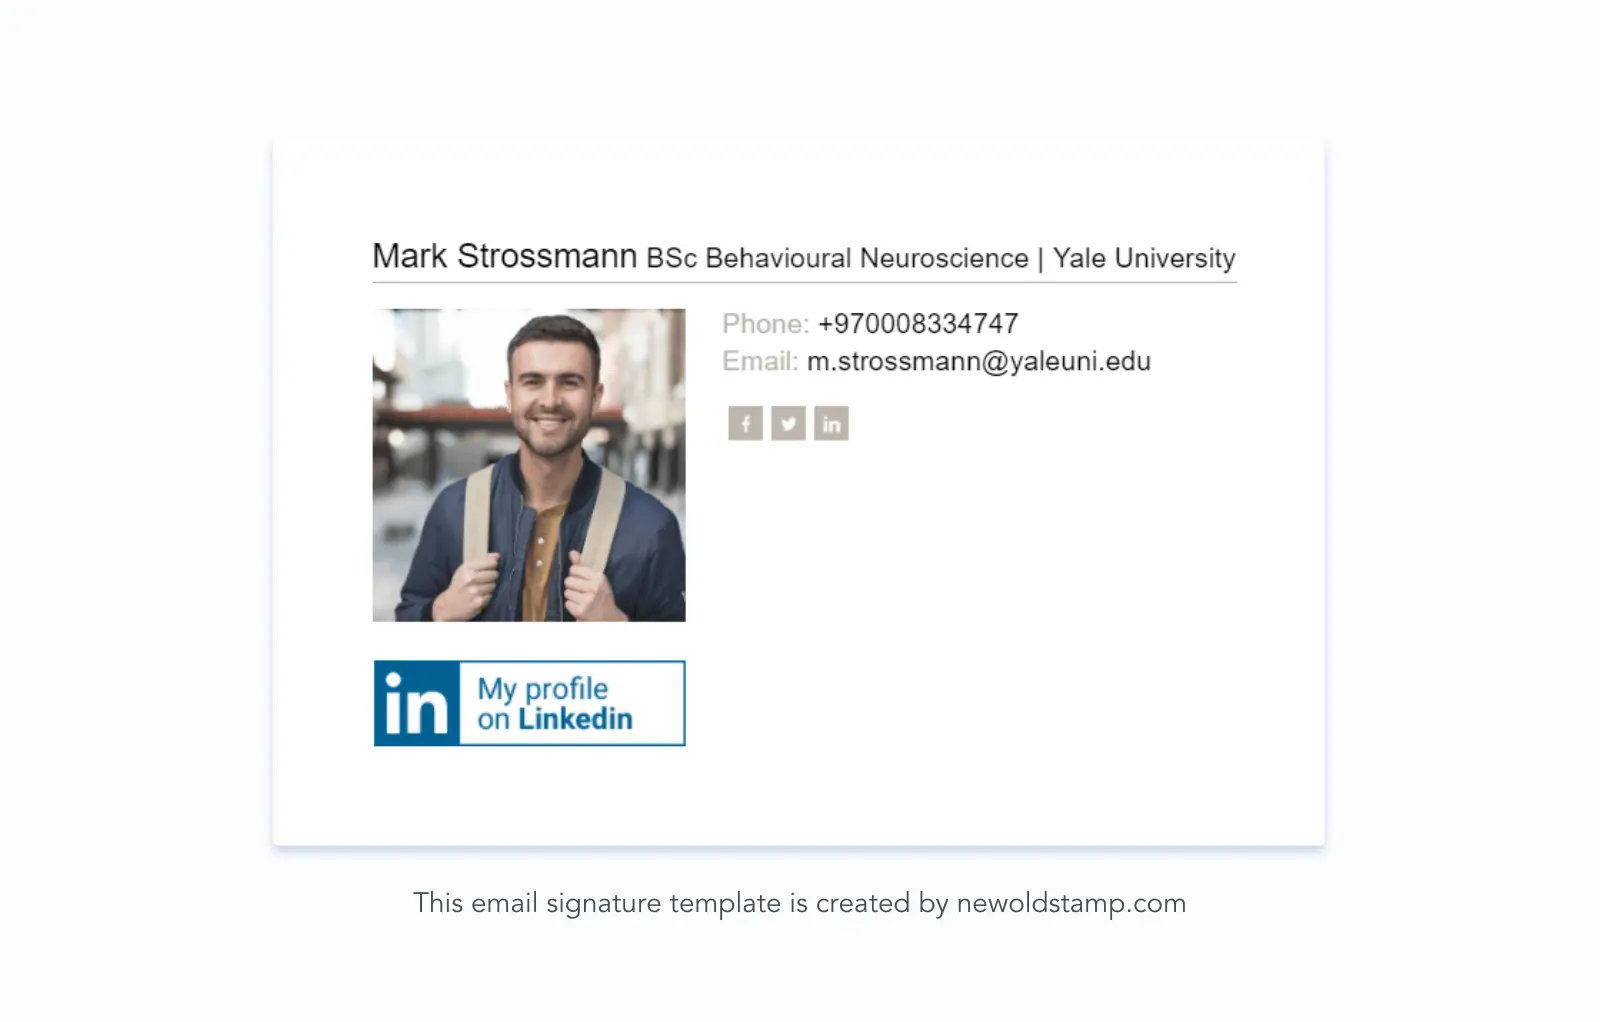 Example 10. Graduate student email signature with an invitation to connect on LinkedIn